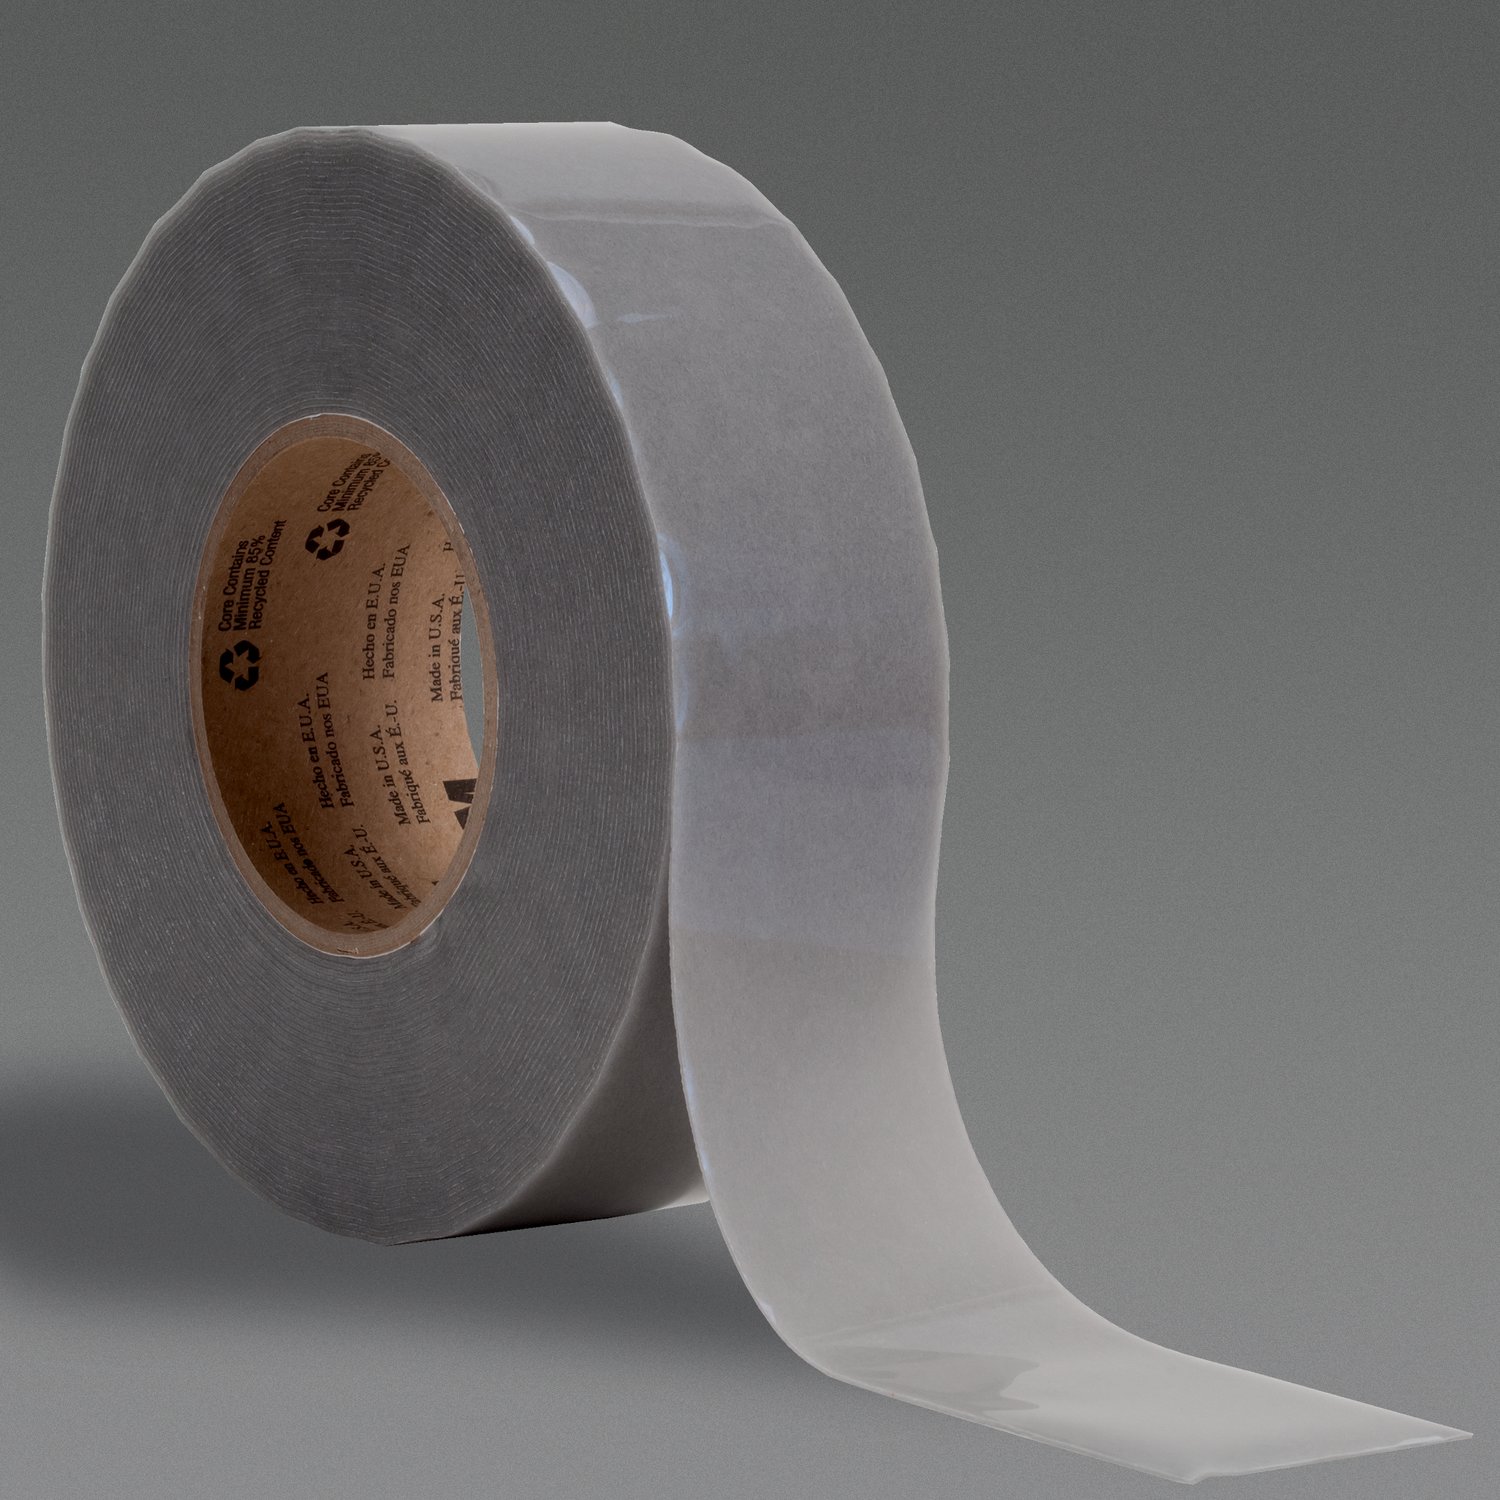 7100009406 - 3M Extreme Sealing Tape 4412G, Gray, 80 mil, Roll, Config